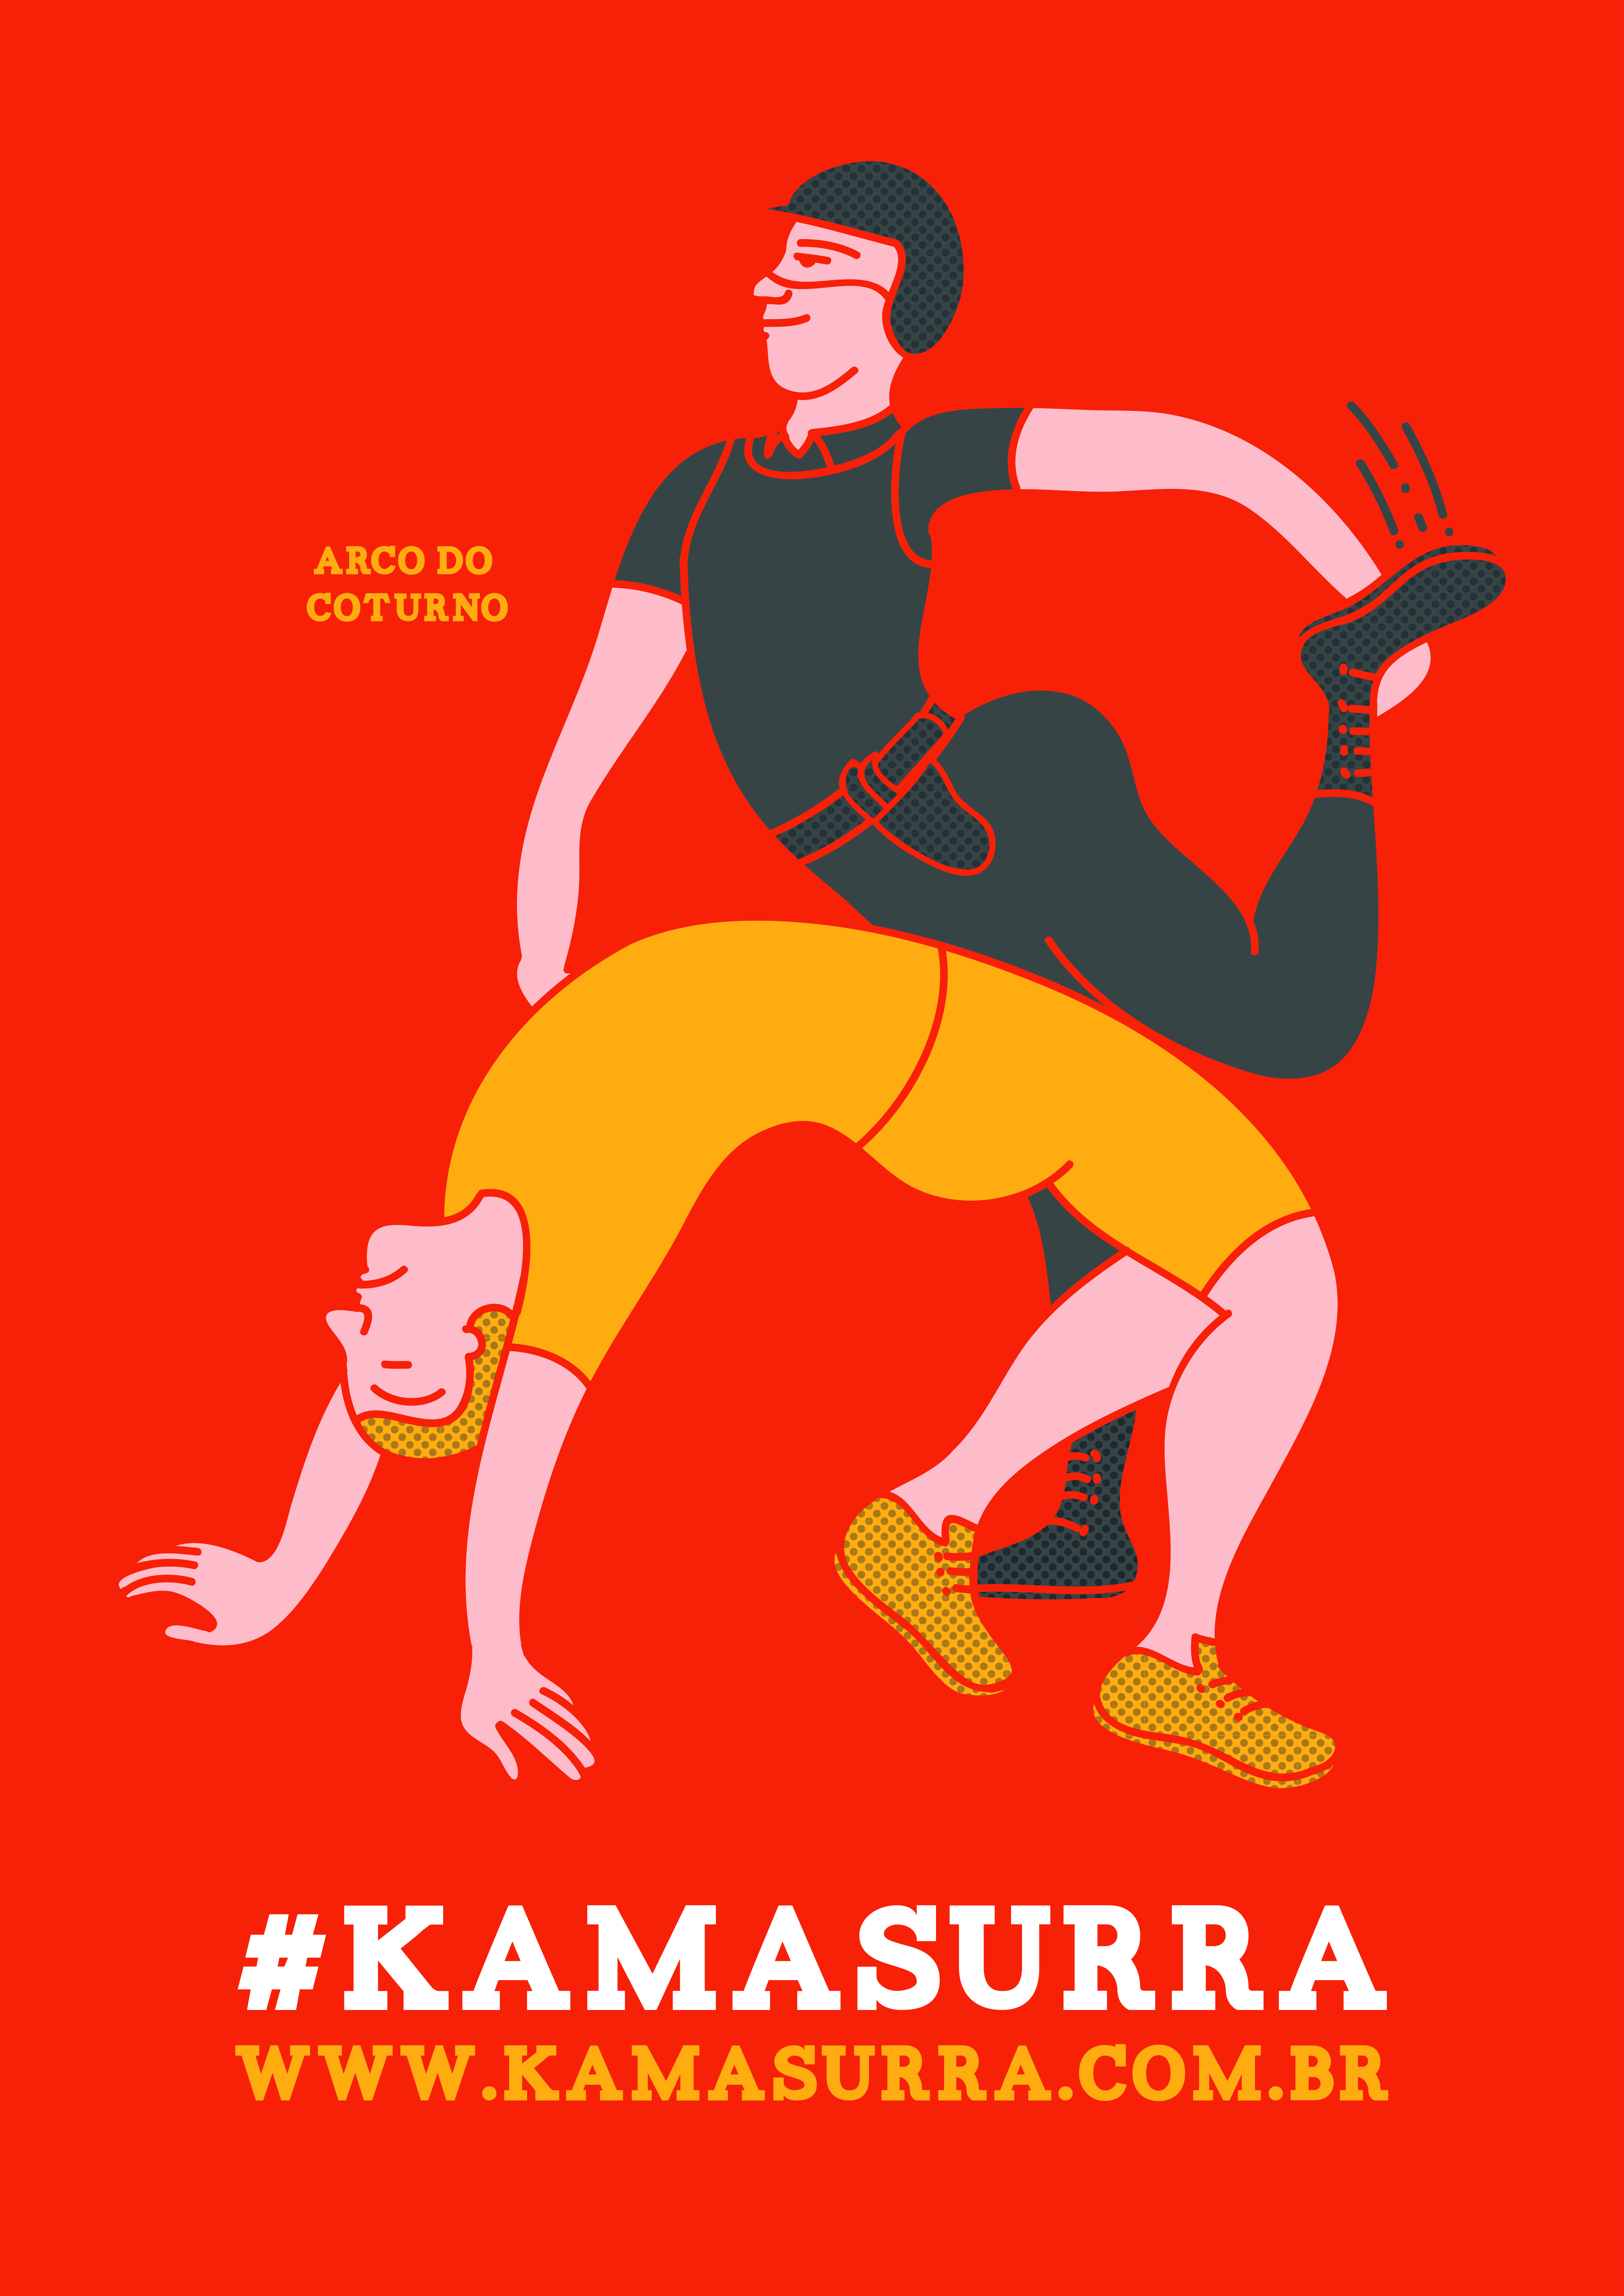 Kamasutra for fat people